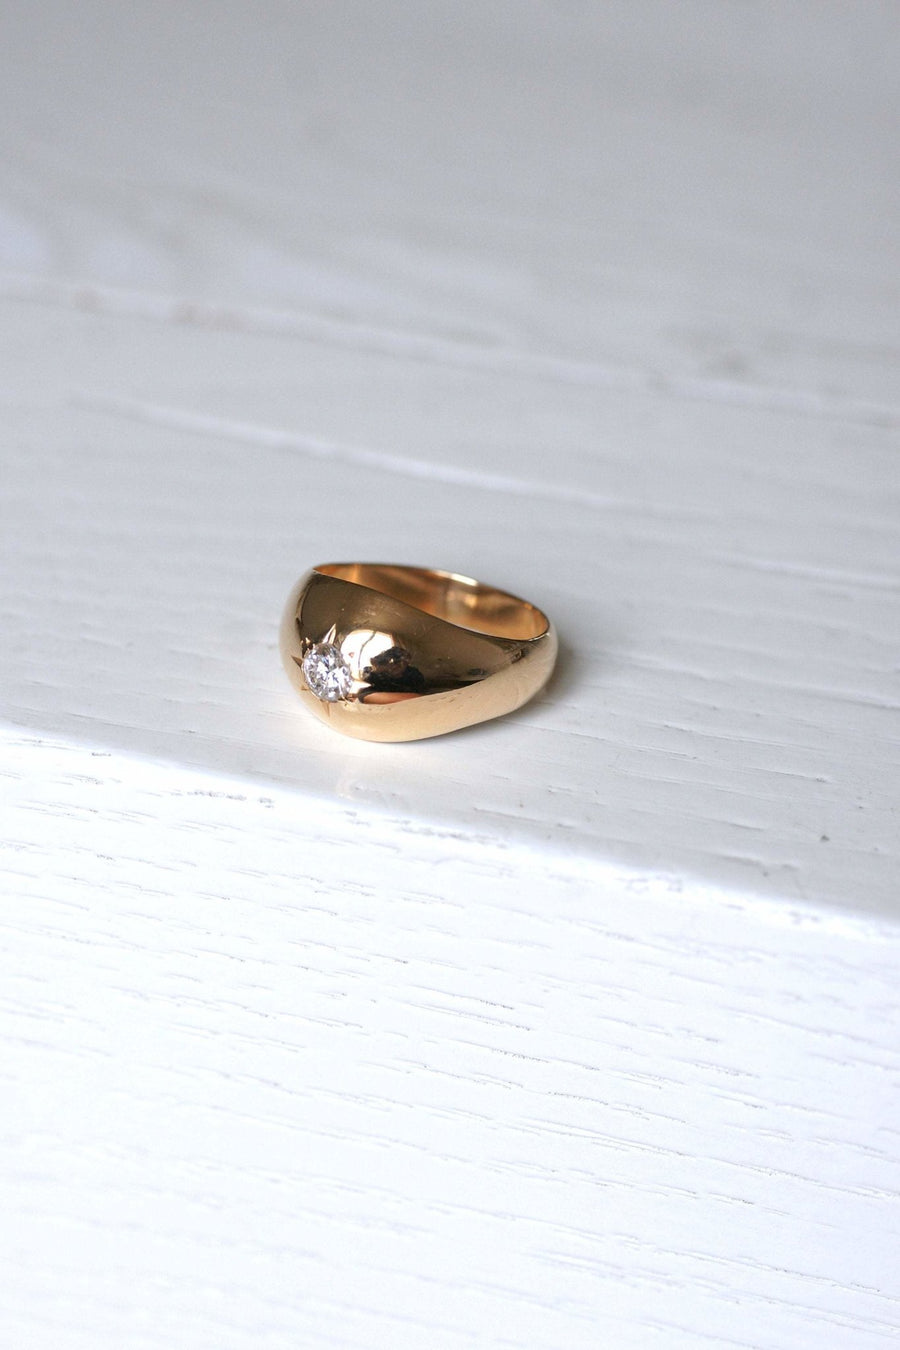 Vintage rose gold and diamond ring - Penelope Gallery